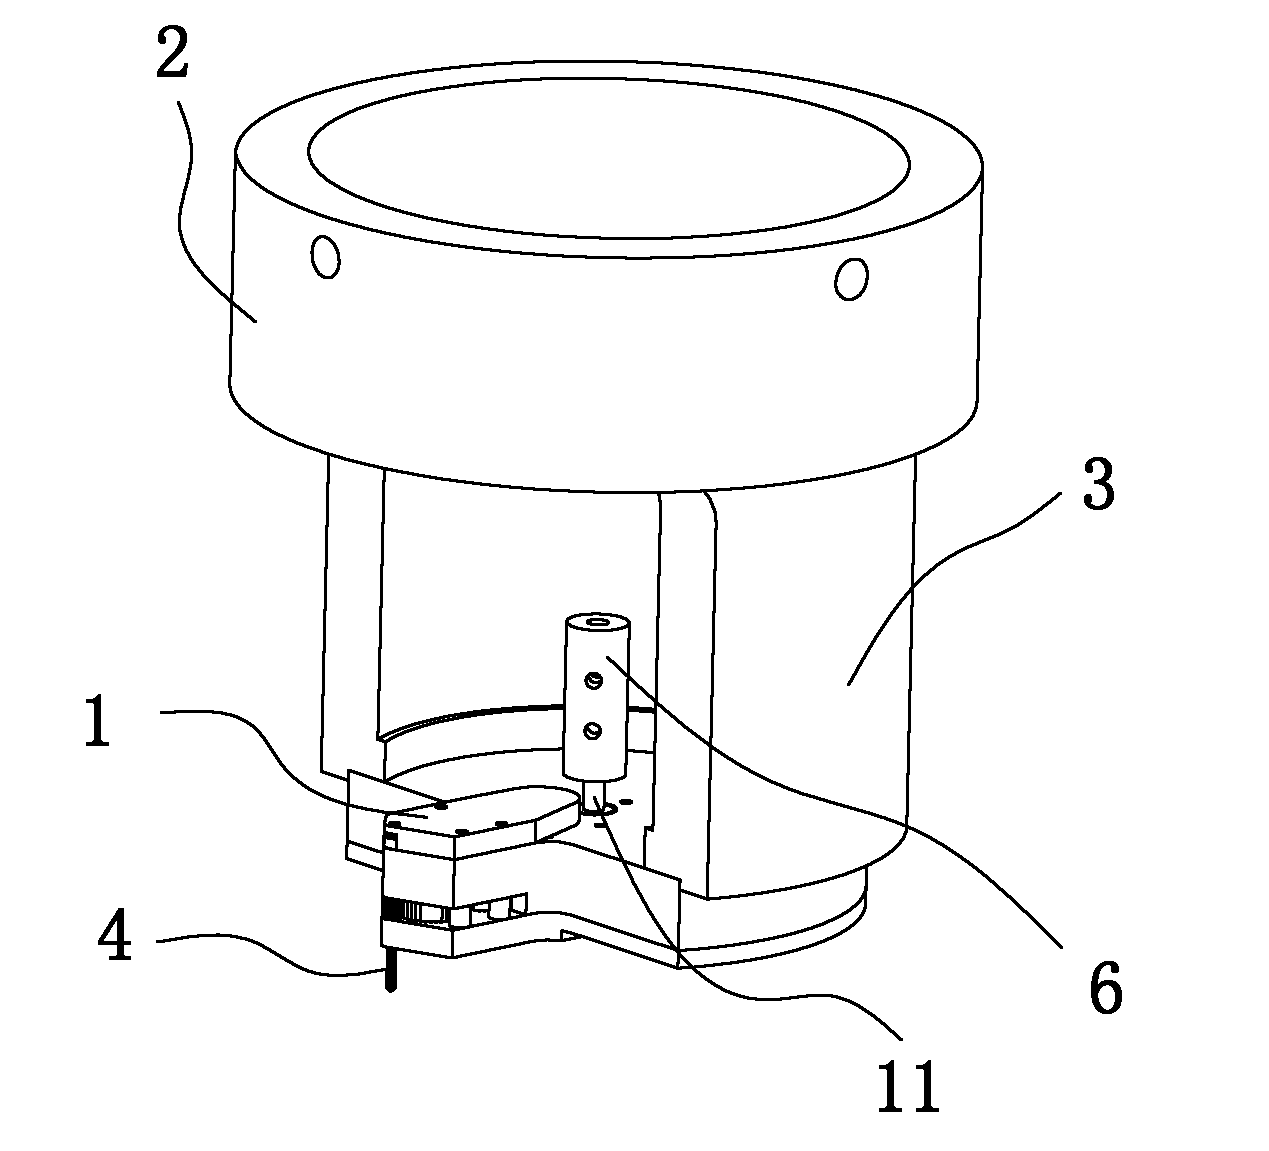 Machining device for drilling and tapping inside small space